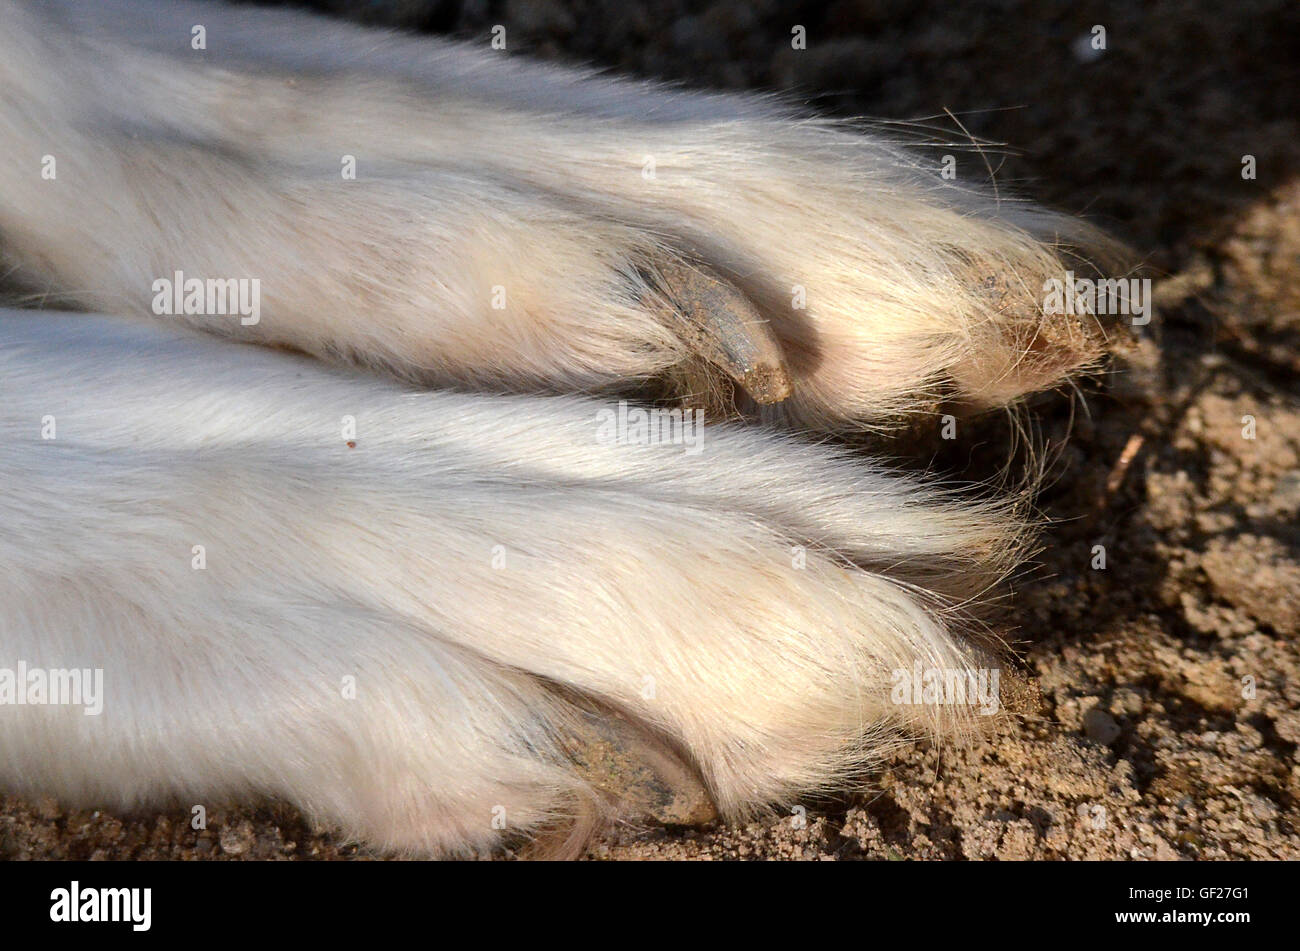 Two dog paws seen on dog laying in the sand. Stock Photo